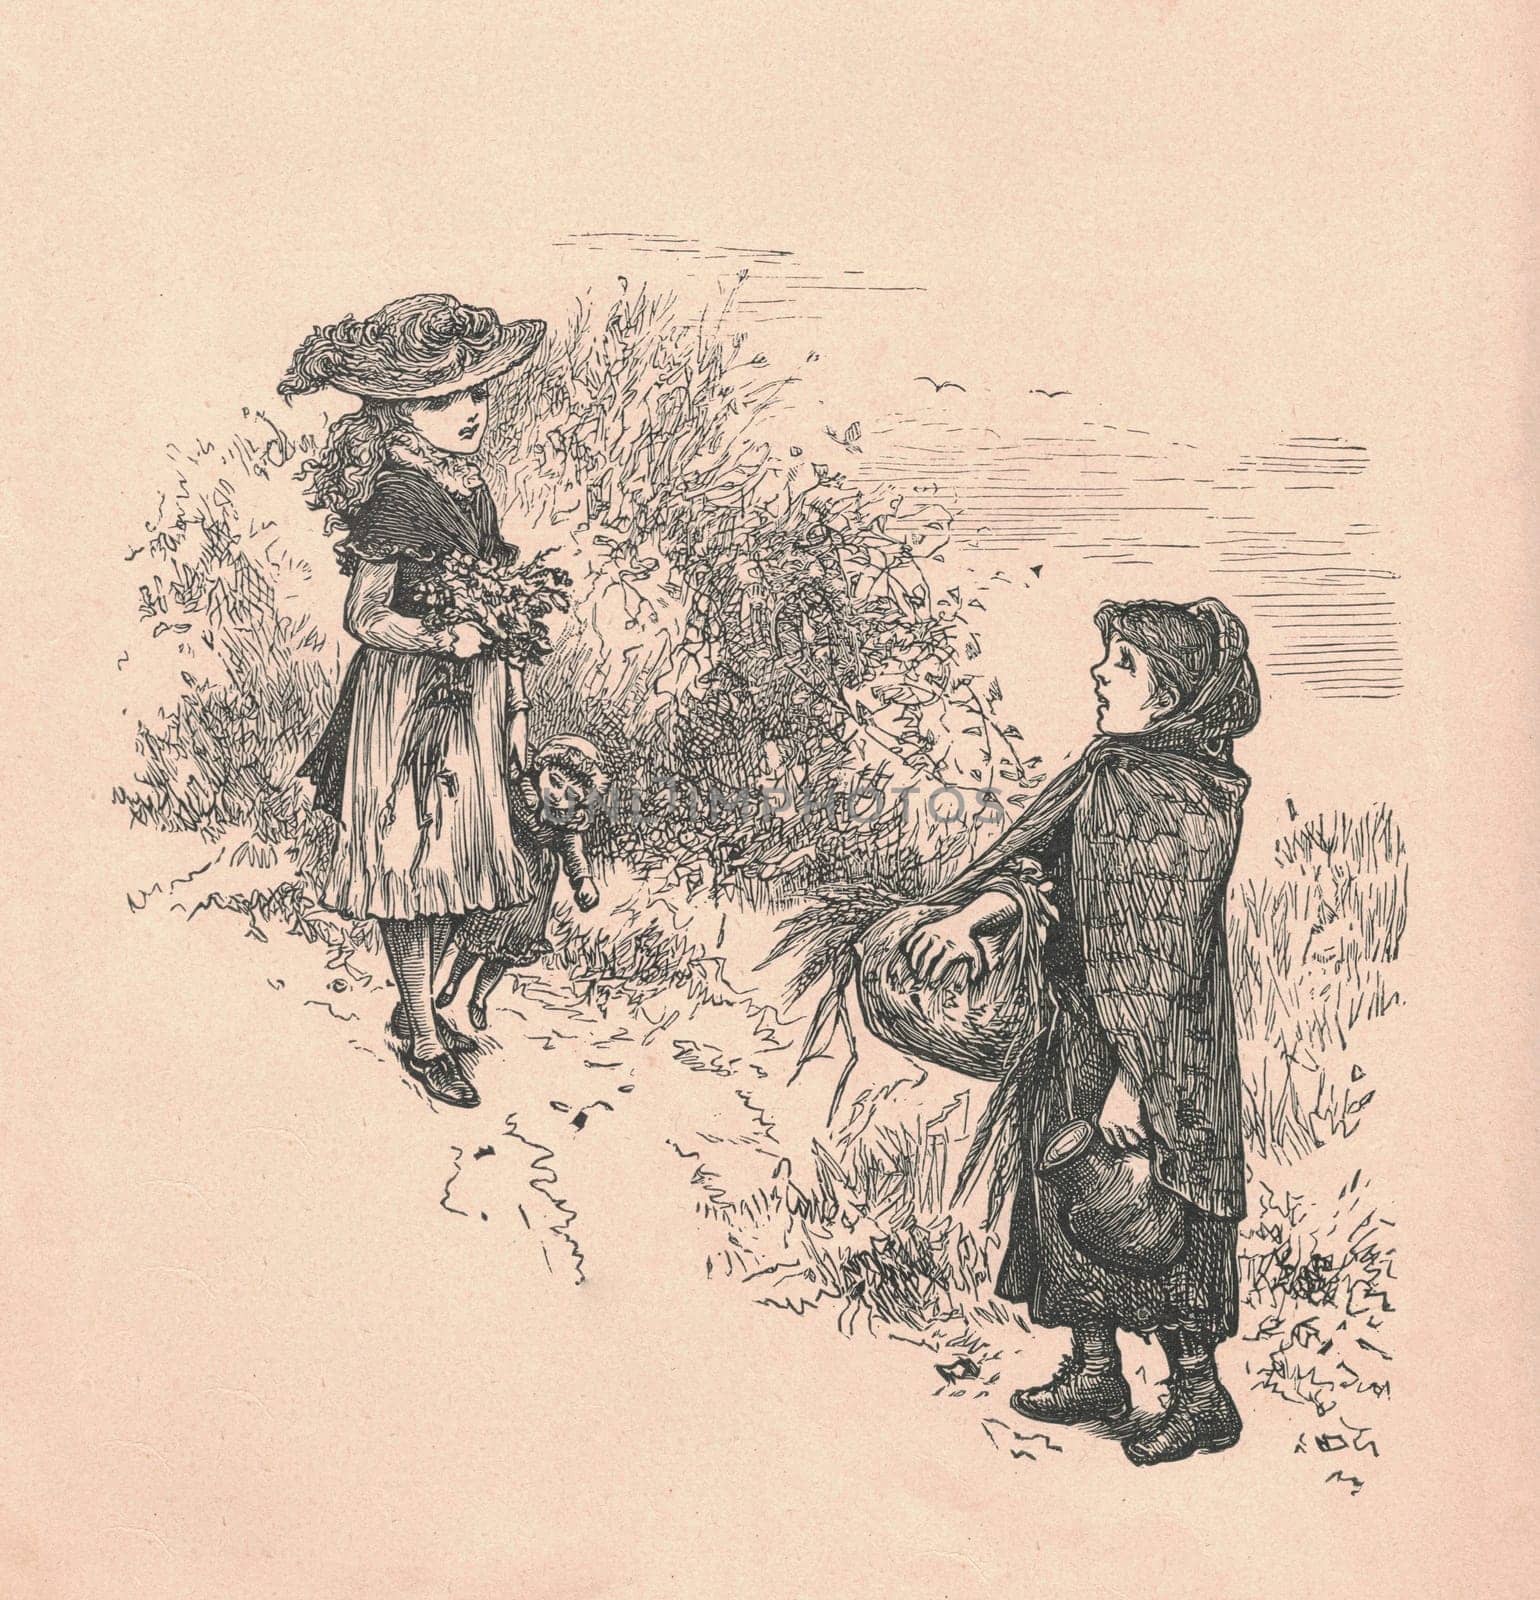 Black and white antique illustration shows two little girls in nature. Vintage drawing shows two young girls outside. Old picture from fairy tale book. Storybook illustration published 1910. A fairy tale, fairytale, wonder tale, magic tale, fairy story or Marchen is an instance of folklore genre that takes the form of a short story. Such stories typically feature mythical entities such as dwarfs, dragons, elves, fairies and Peris, giants, Divs, gnomes, goblins, griffins, mermaids, talking animals, trolls, unicorns, or witches, and usually magic or enchantments.